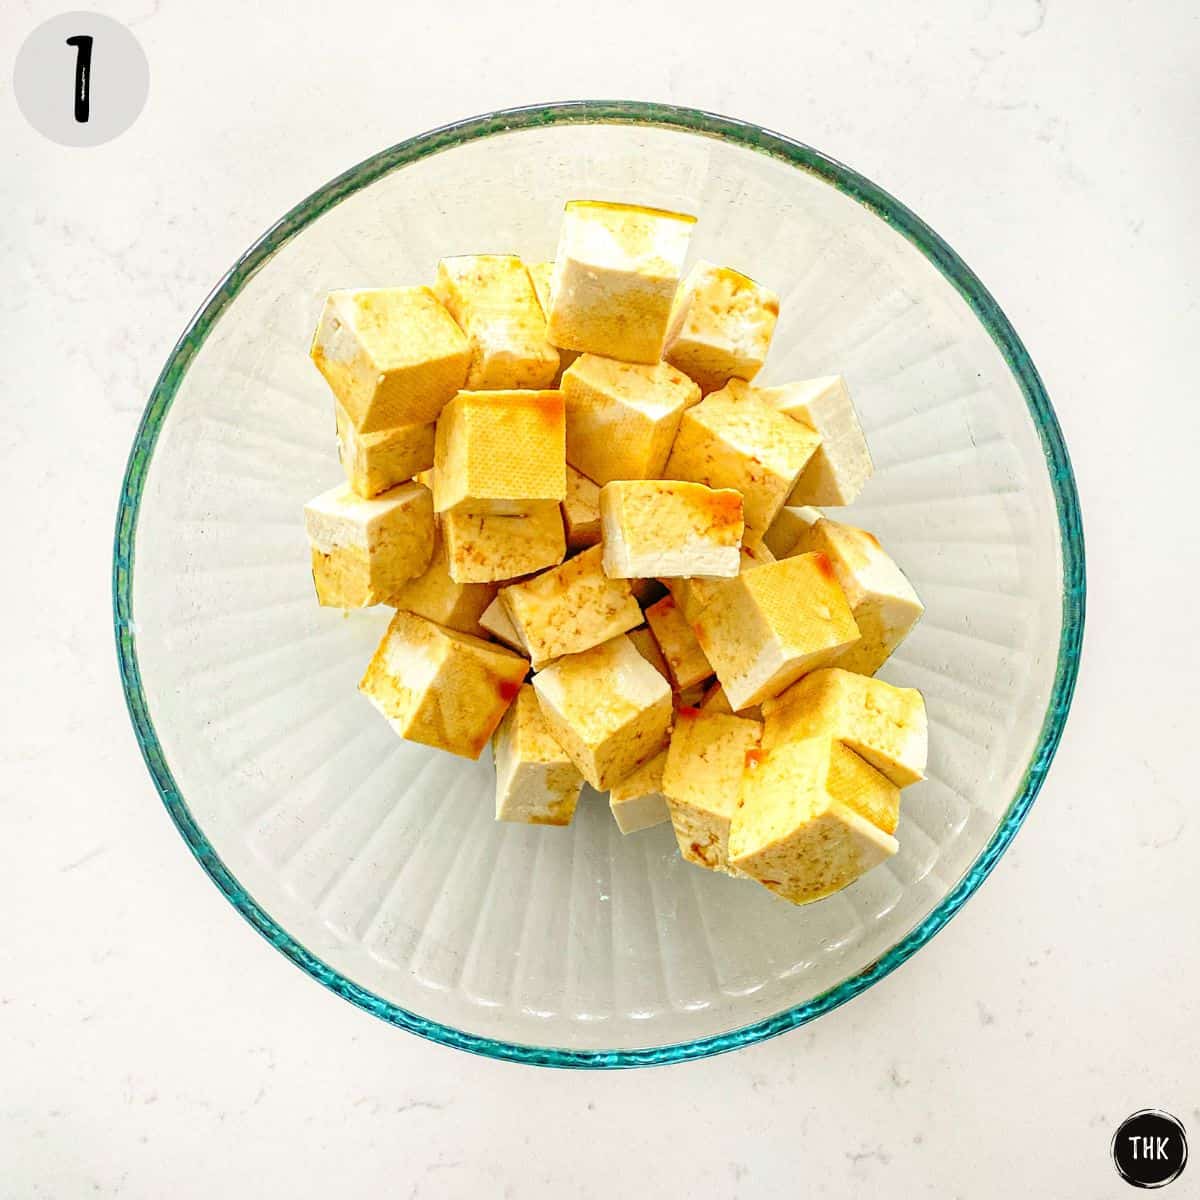 Tofu cubes with soy sauce on top inside mixing bowl.